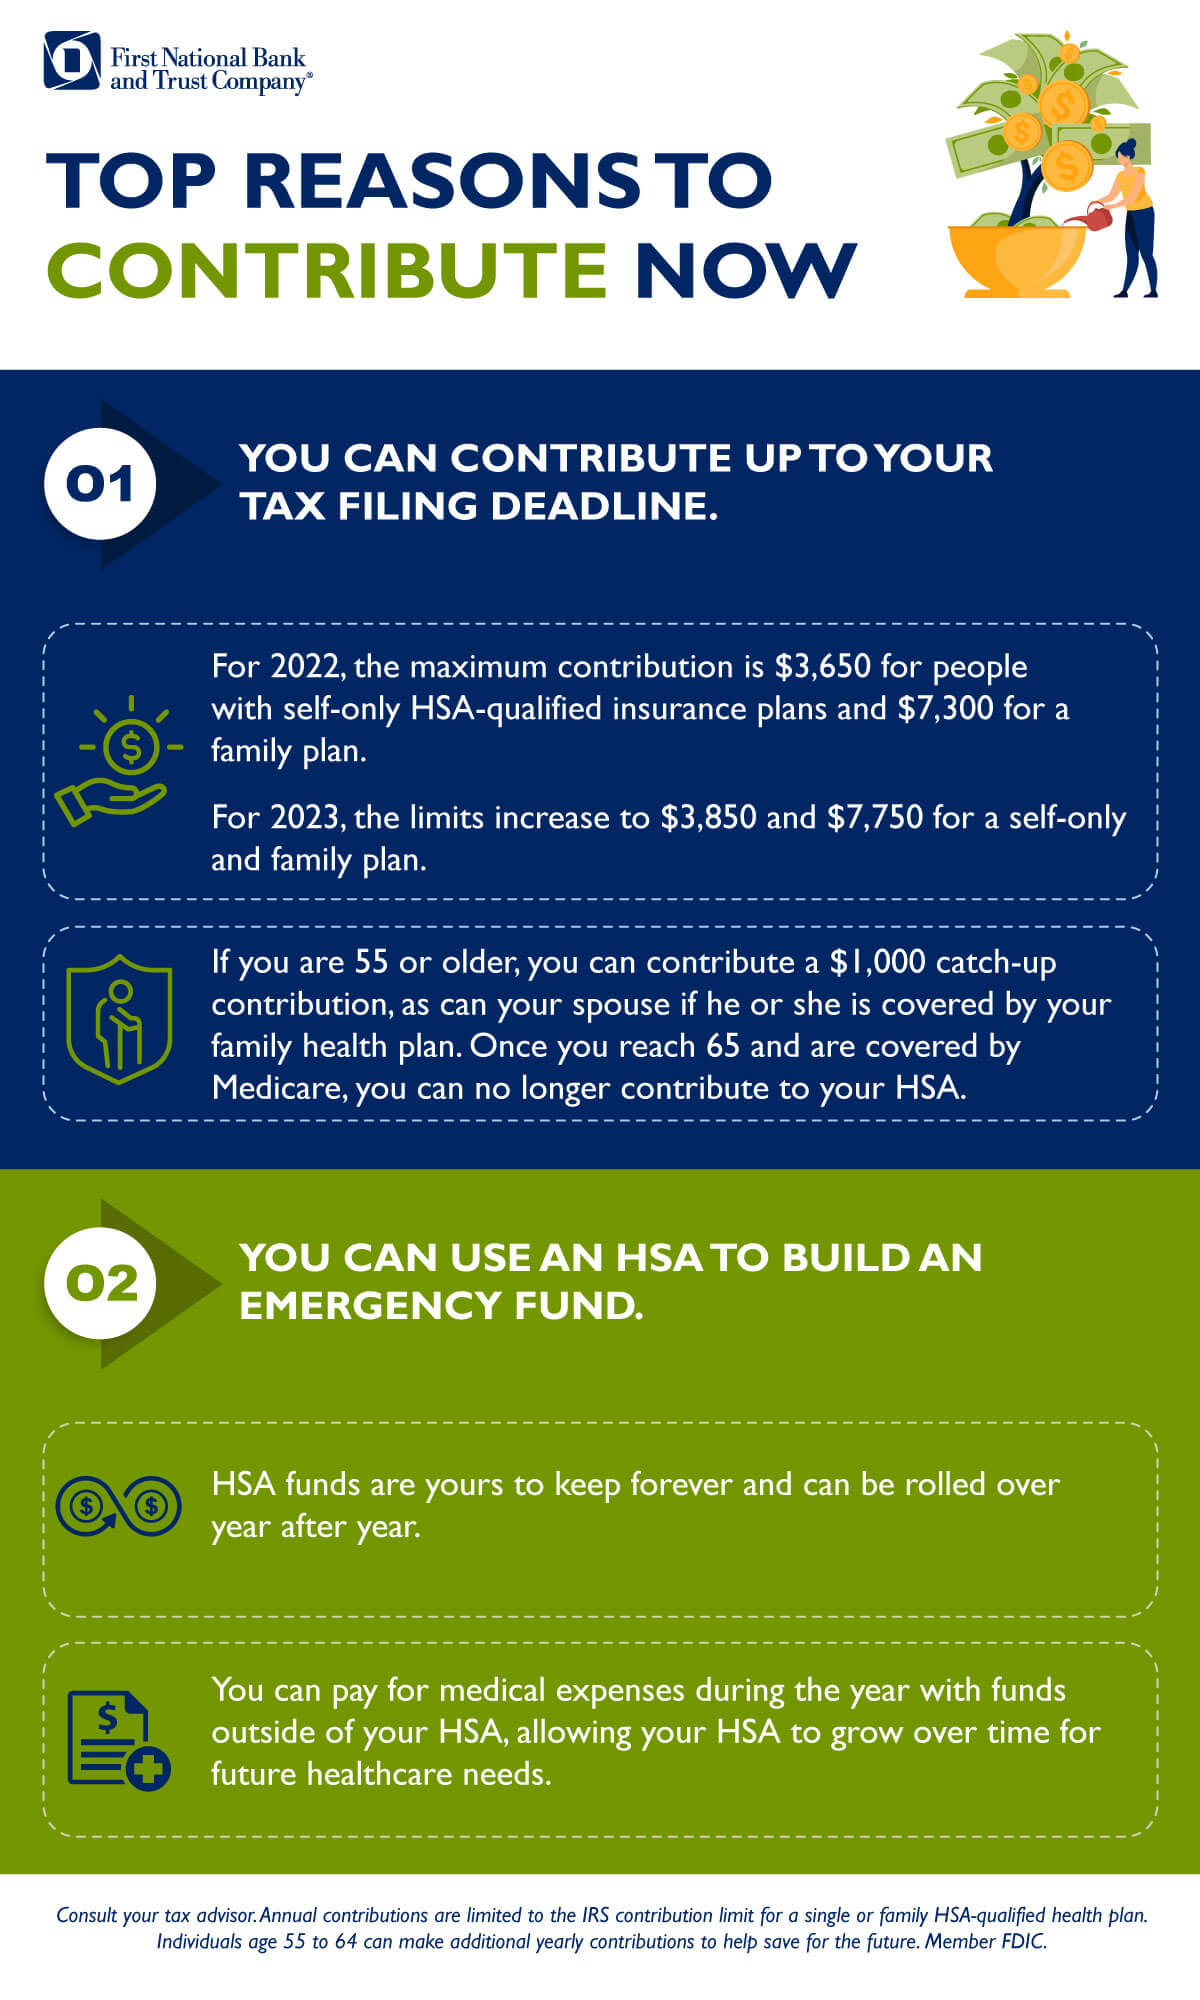 HSA-Eligible Expenses in 2022 and 2023 that Qualify for